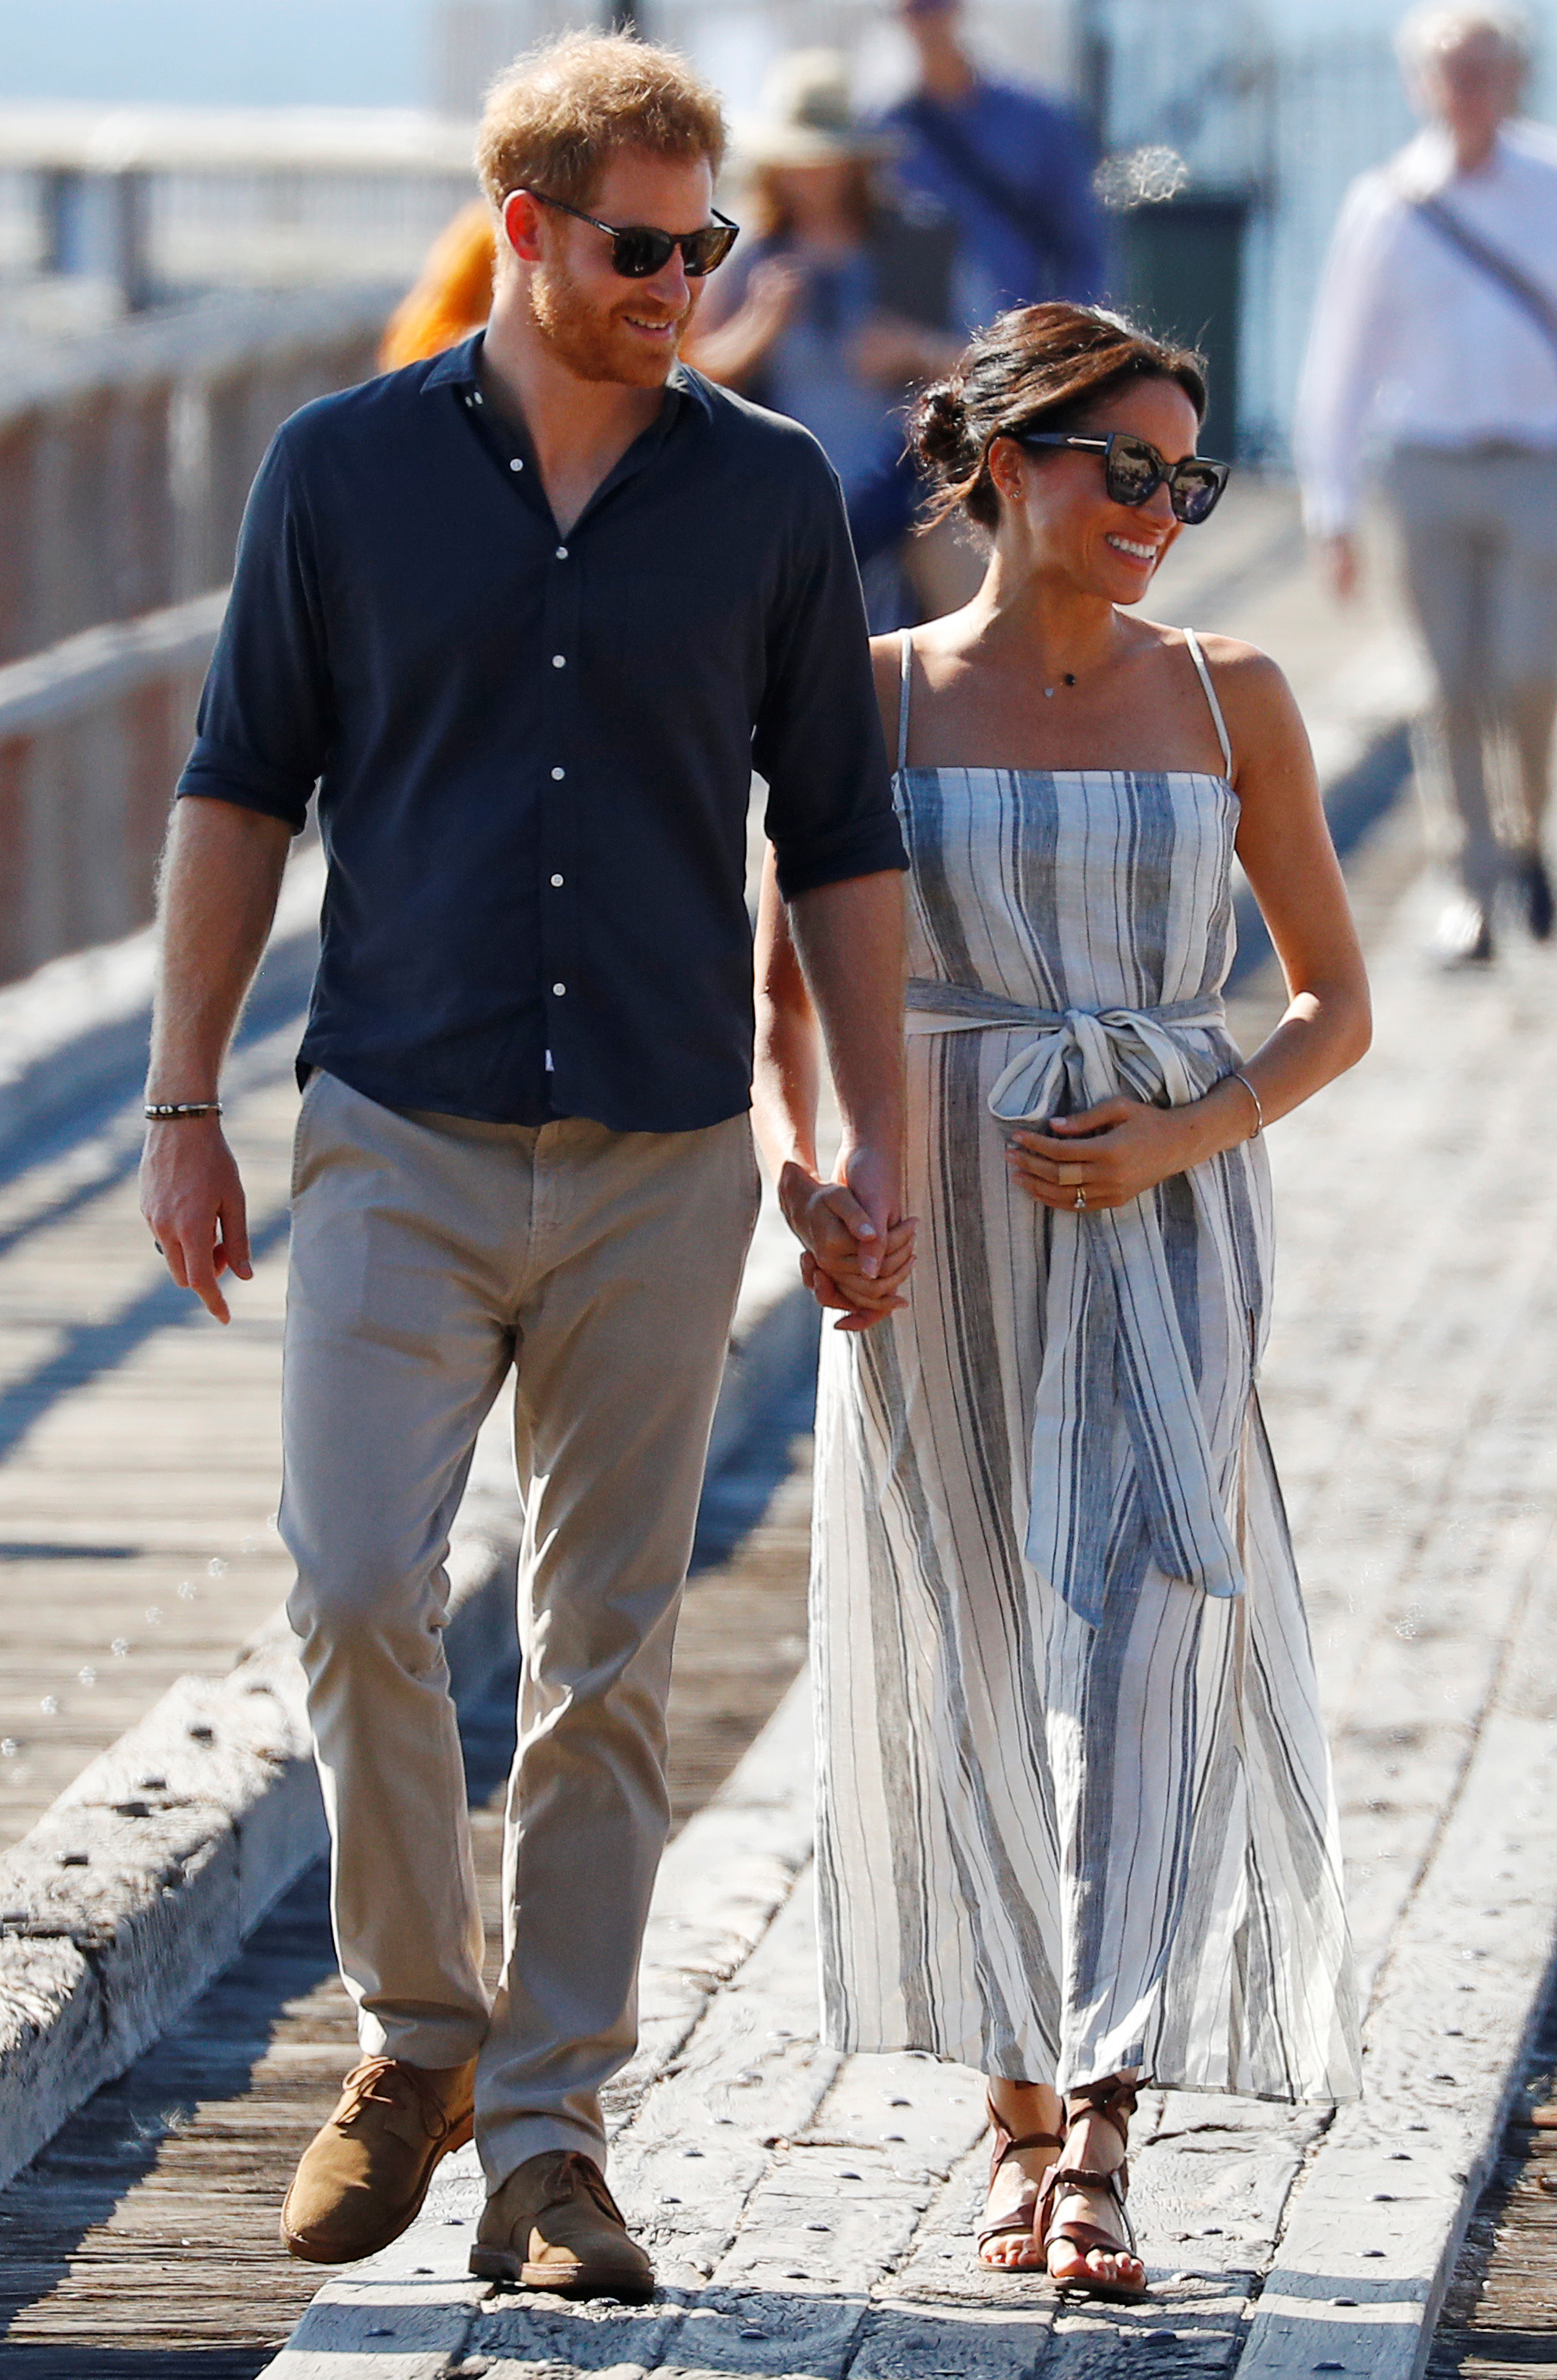 The Duchess of Sussex wears a Reformation linen dress while visiting Fraser Island, Australia.